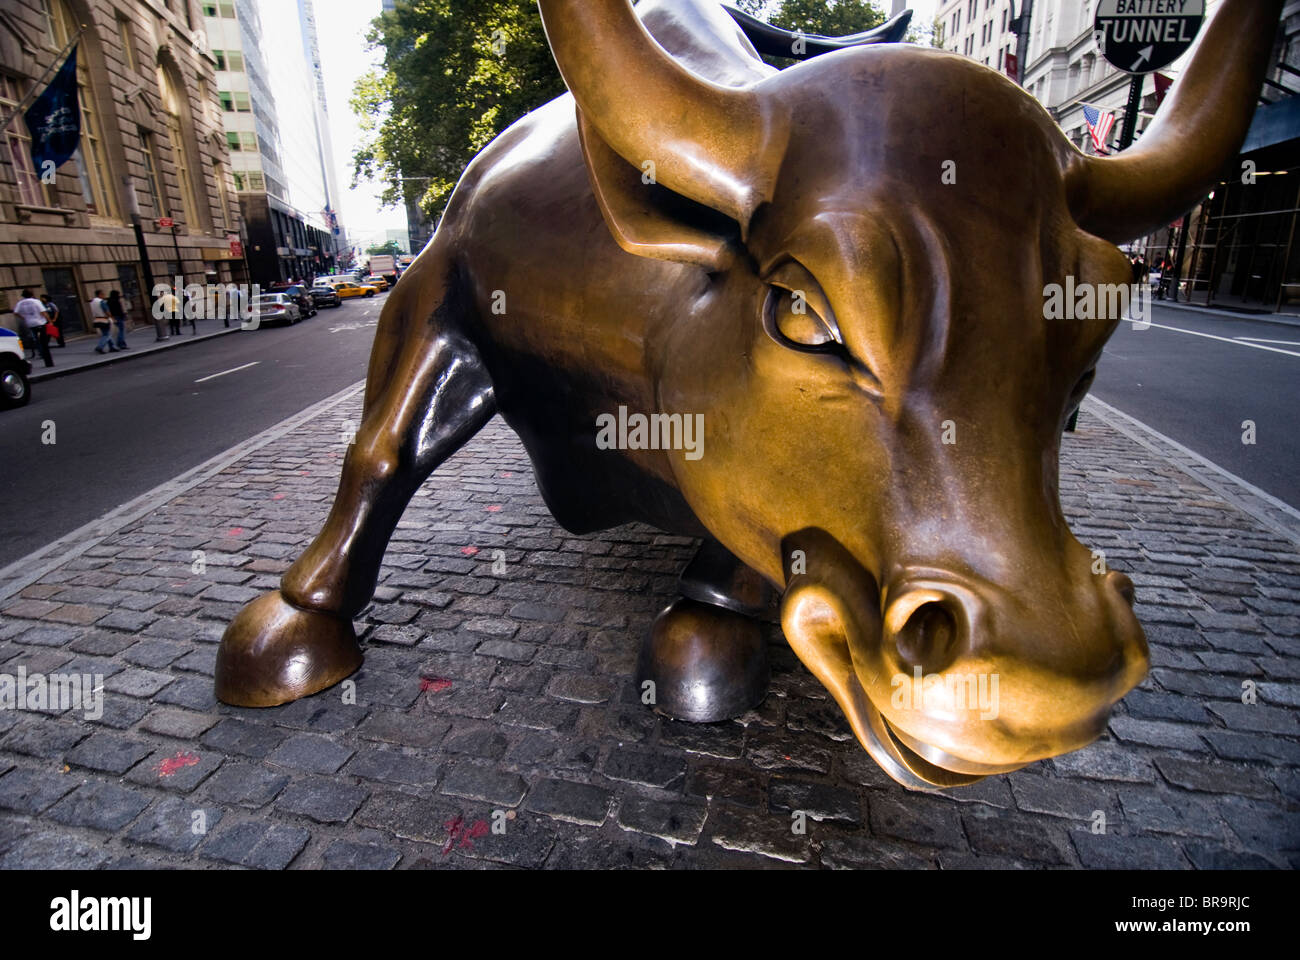 Le Bowling Green / Wall Street bull. Banque D'Images